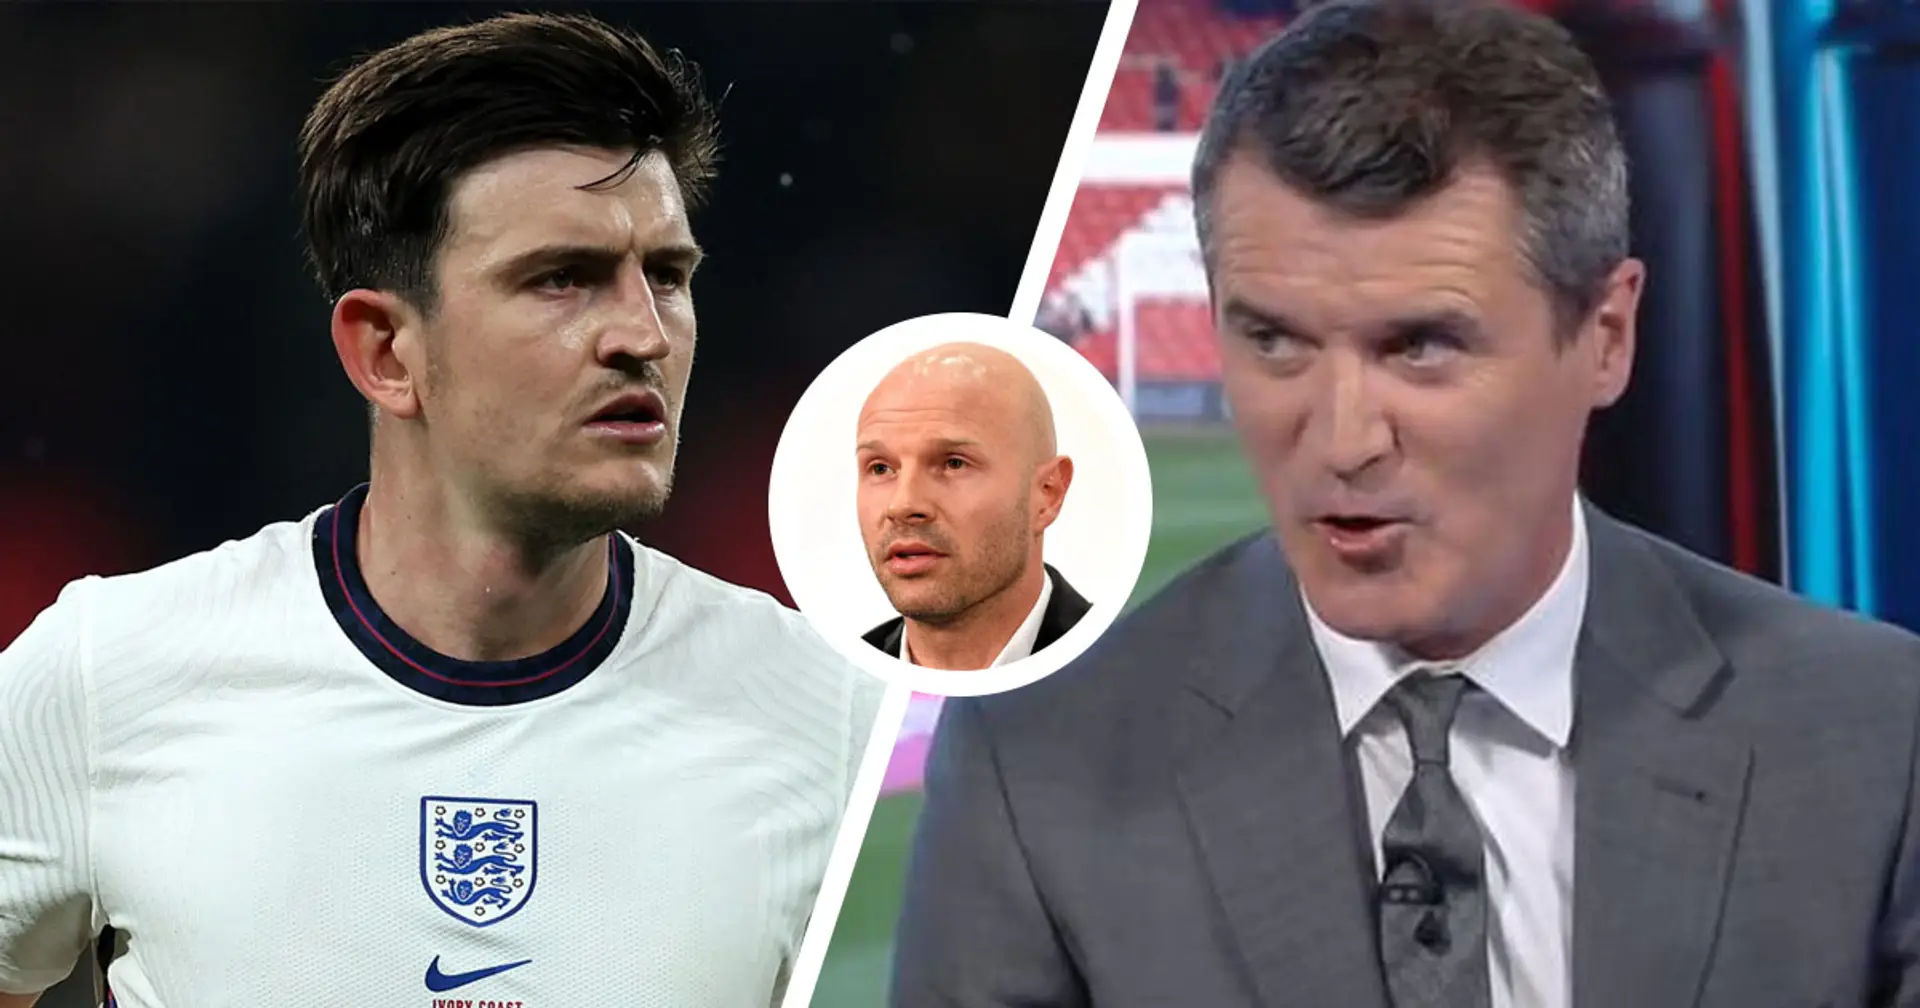 'He can be particularly vicious': Roy Keane blamed for instigating fan backlash towards Maguire